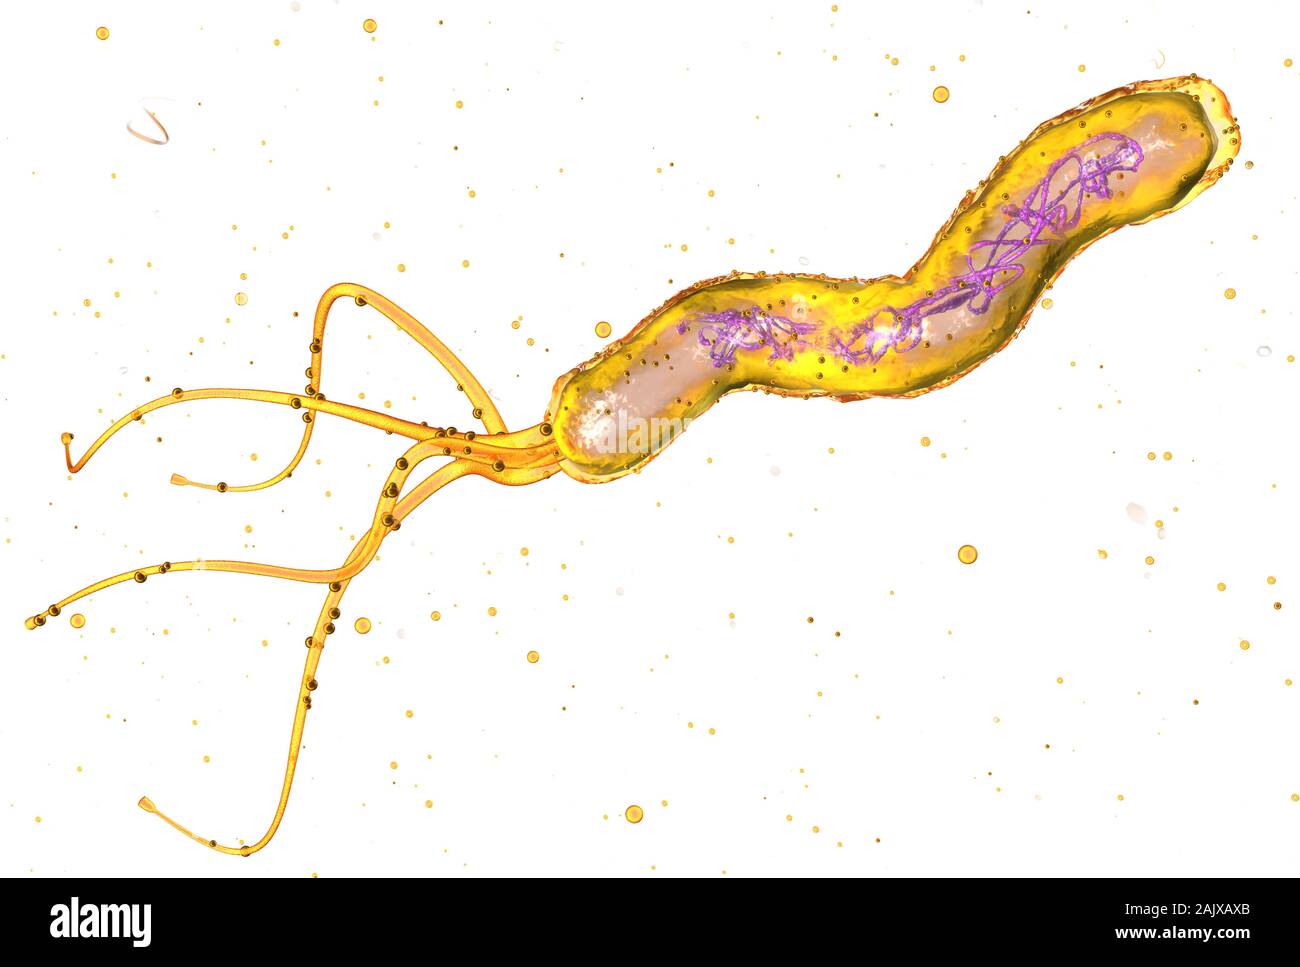 3D illustration showing microscopic view of a single helicobacter pylori bacterium in stomach Stock Photo